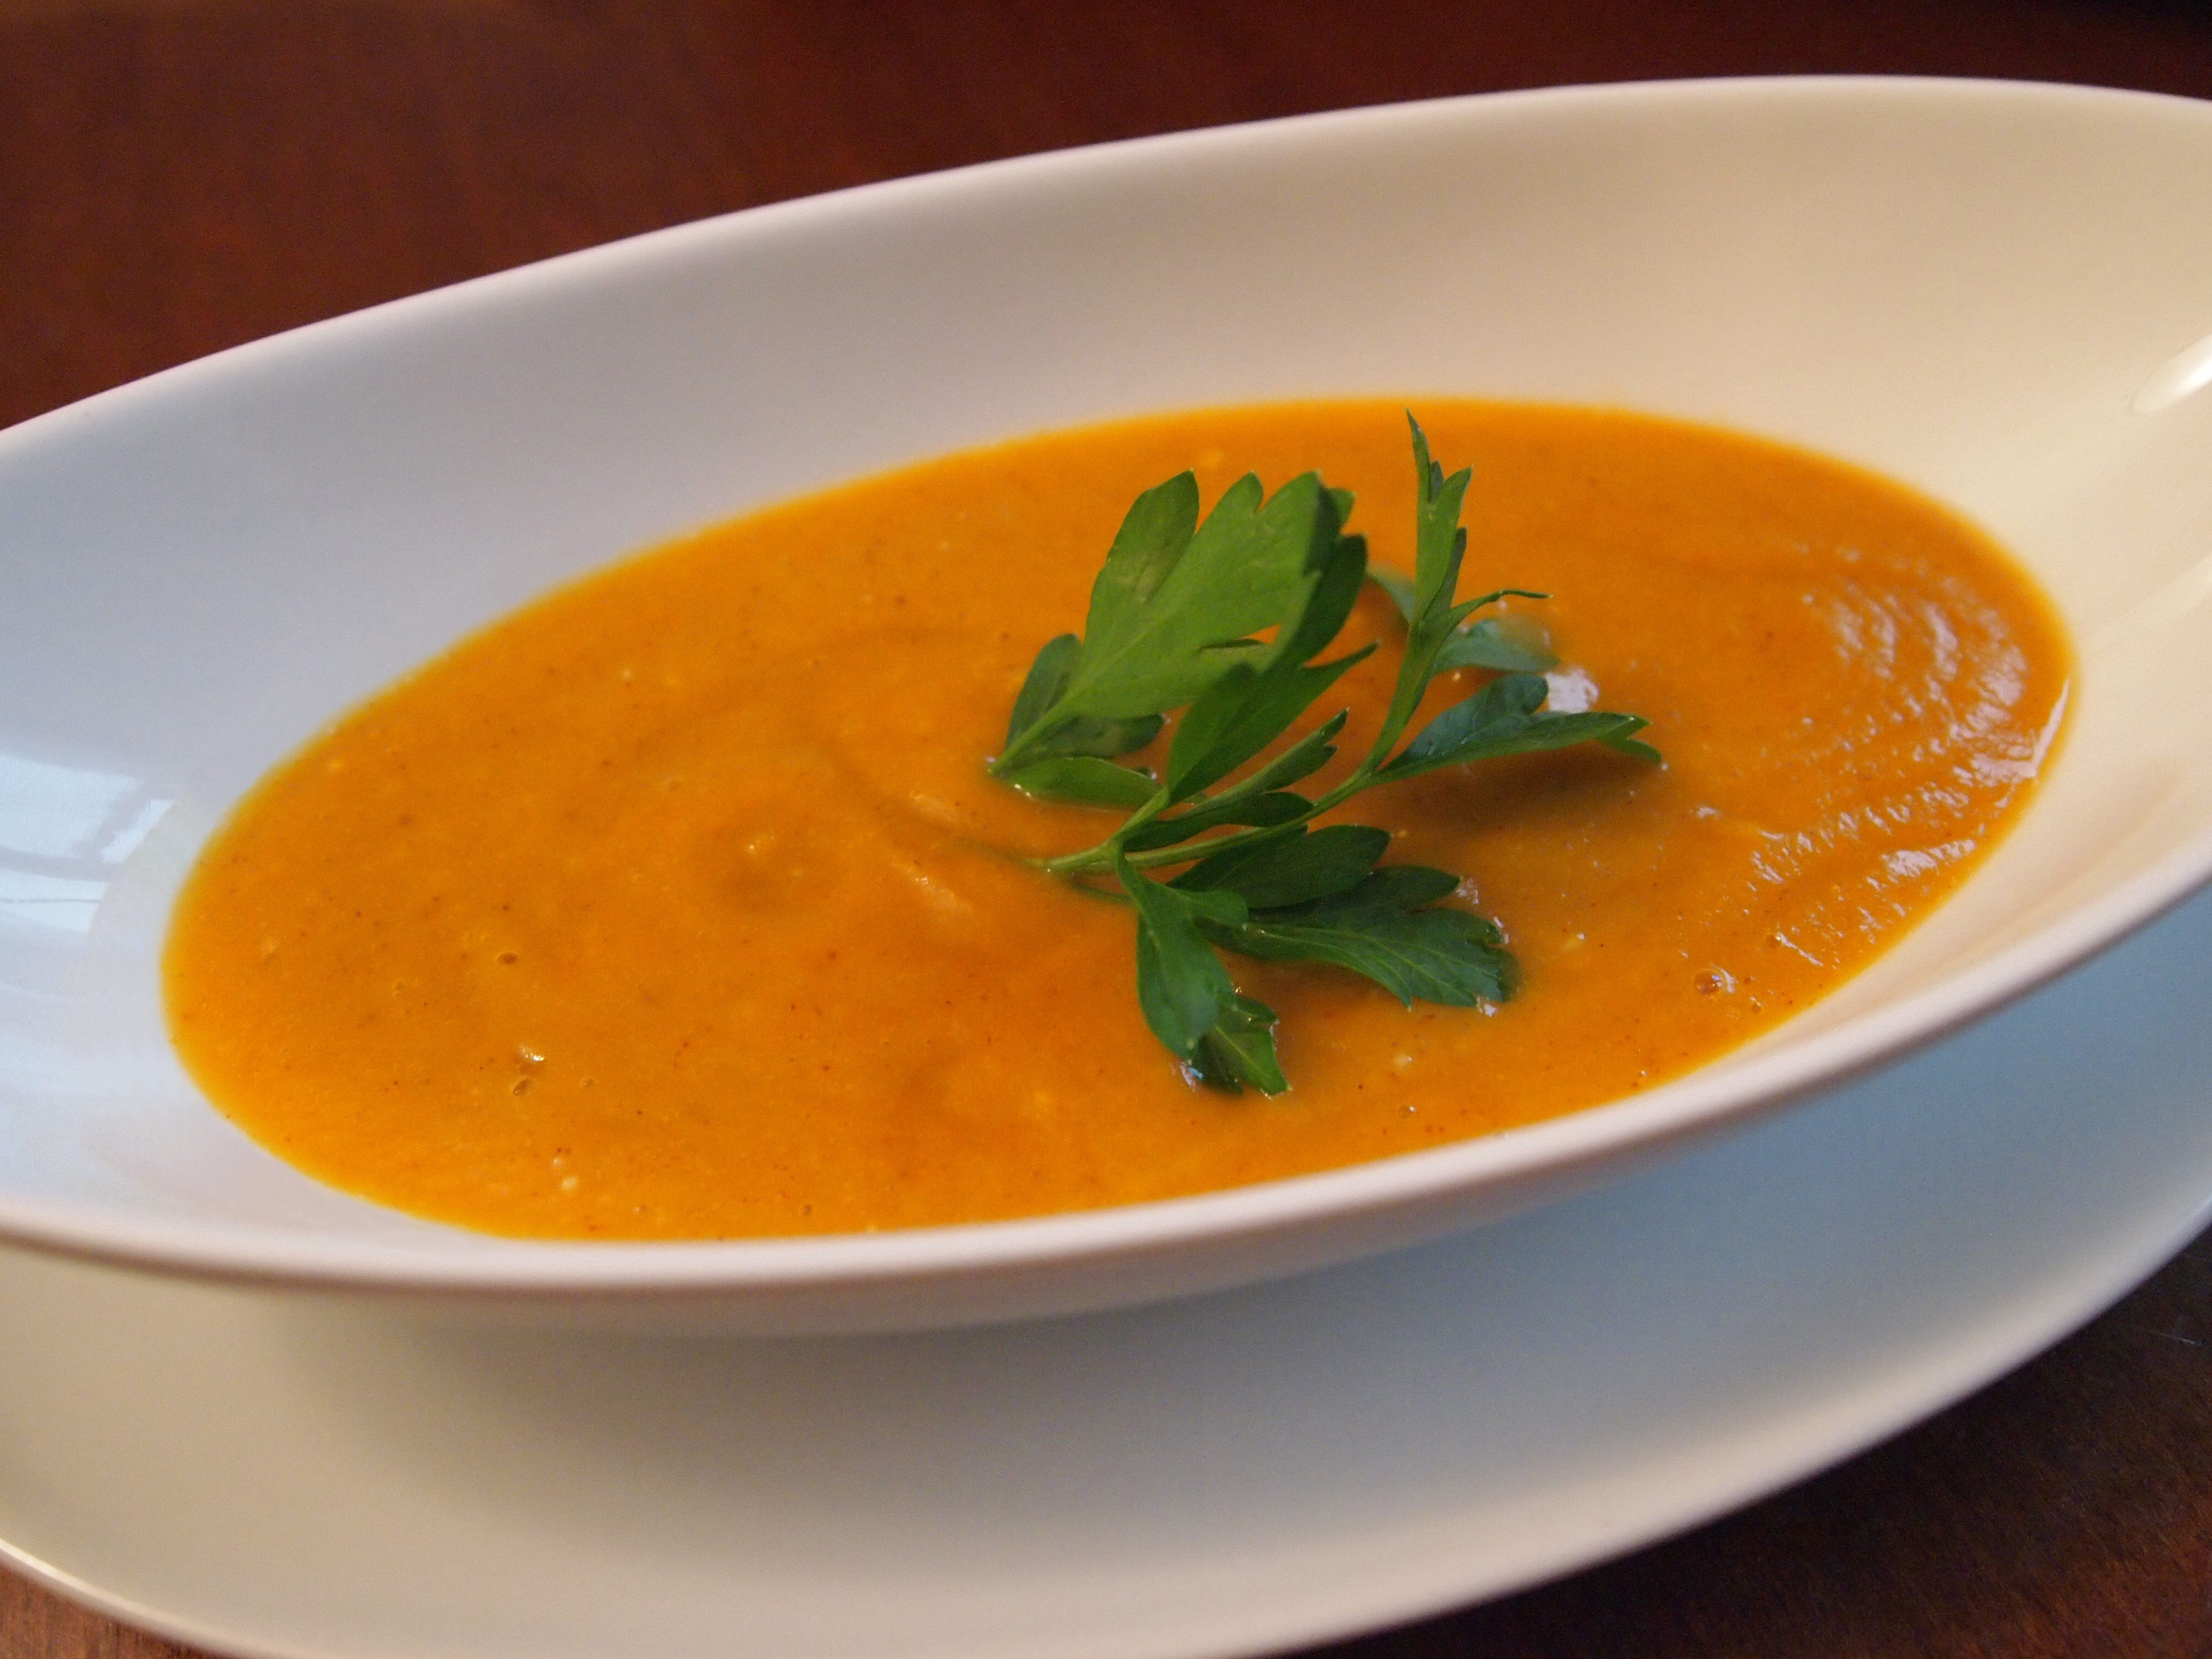 Curried Carrot Soup from Gray hayes